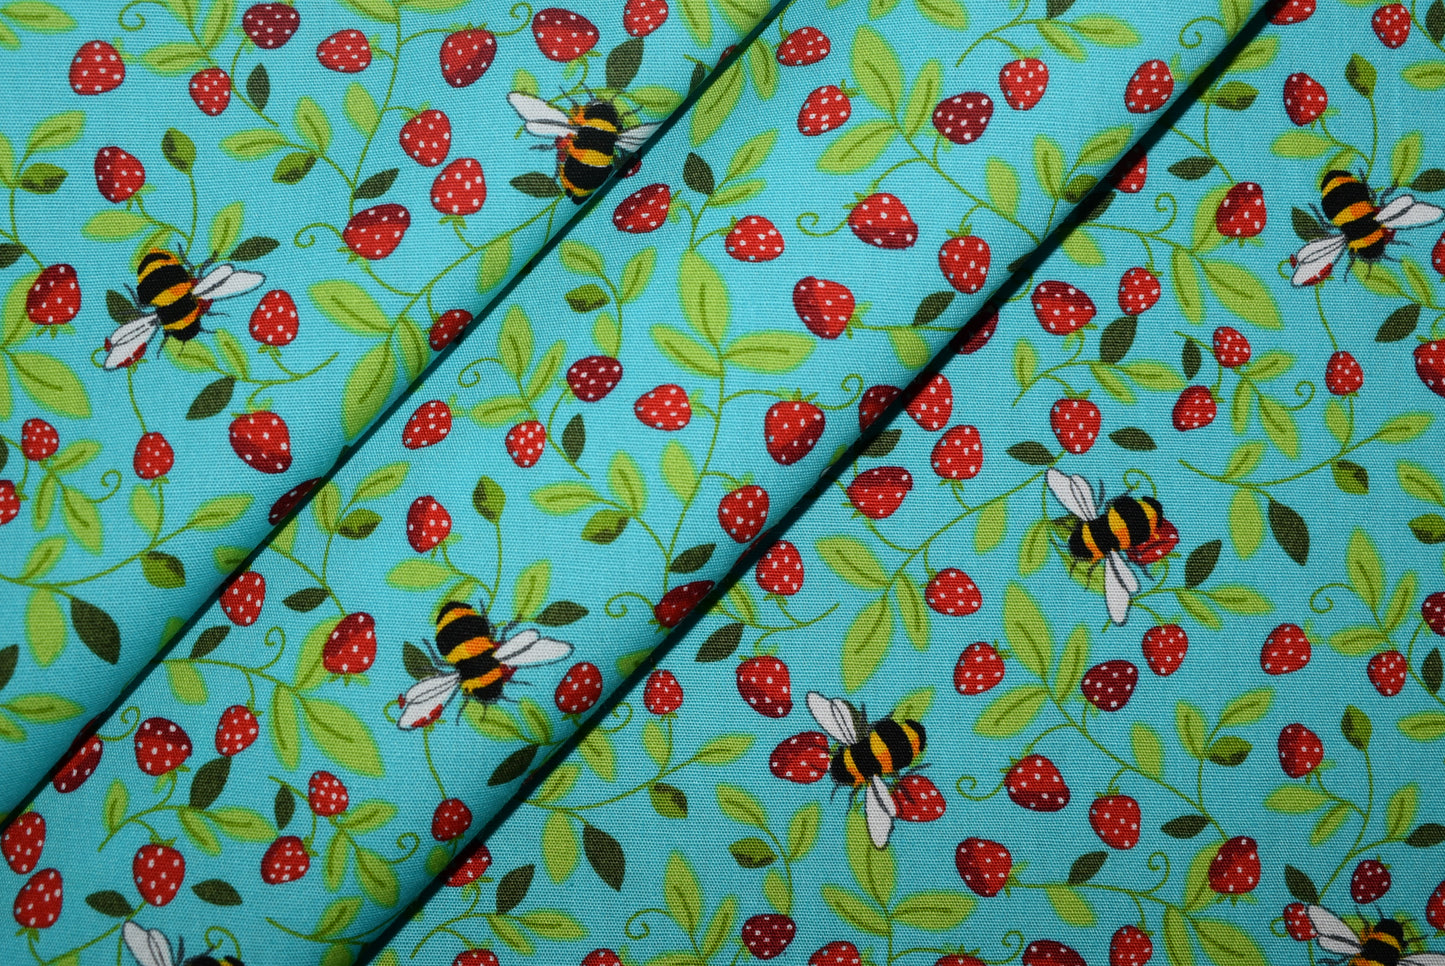 Strawberry Bees